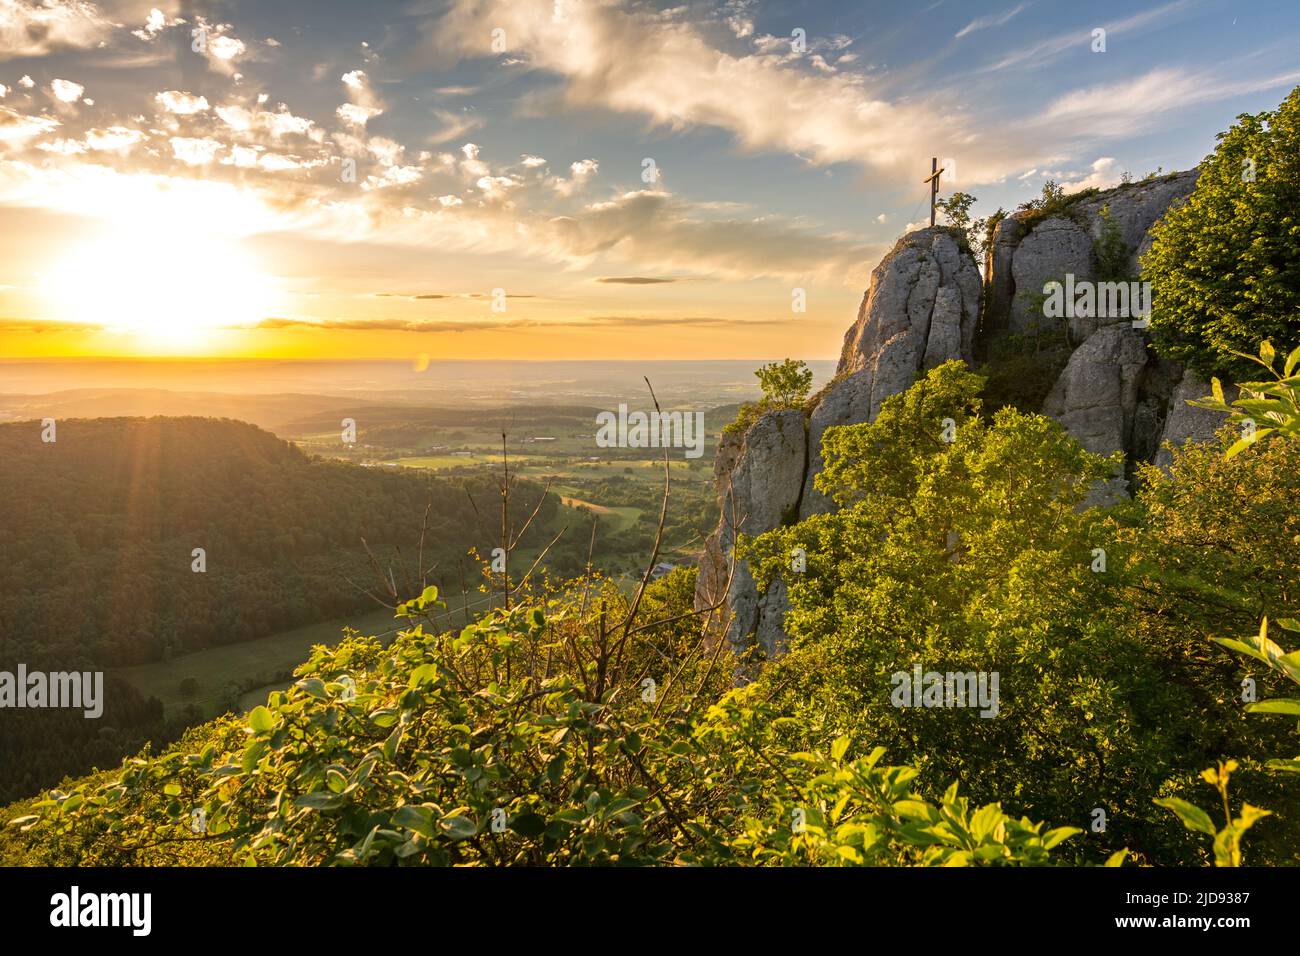 Dramatic sunset over a scenic cliff ledge in the Swabian Jura in Southern Germany Stock Photo